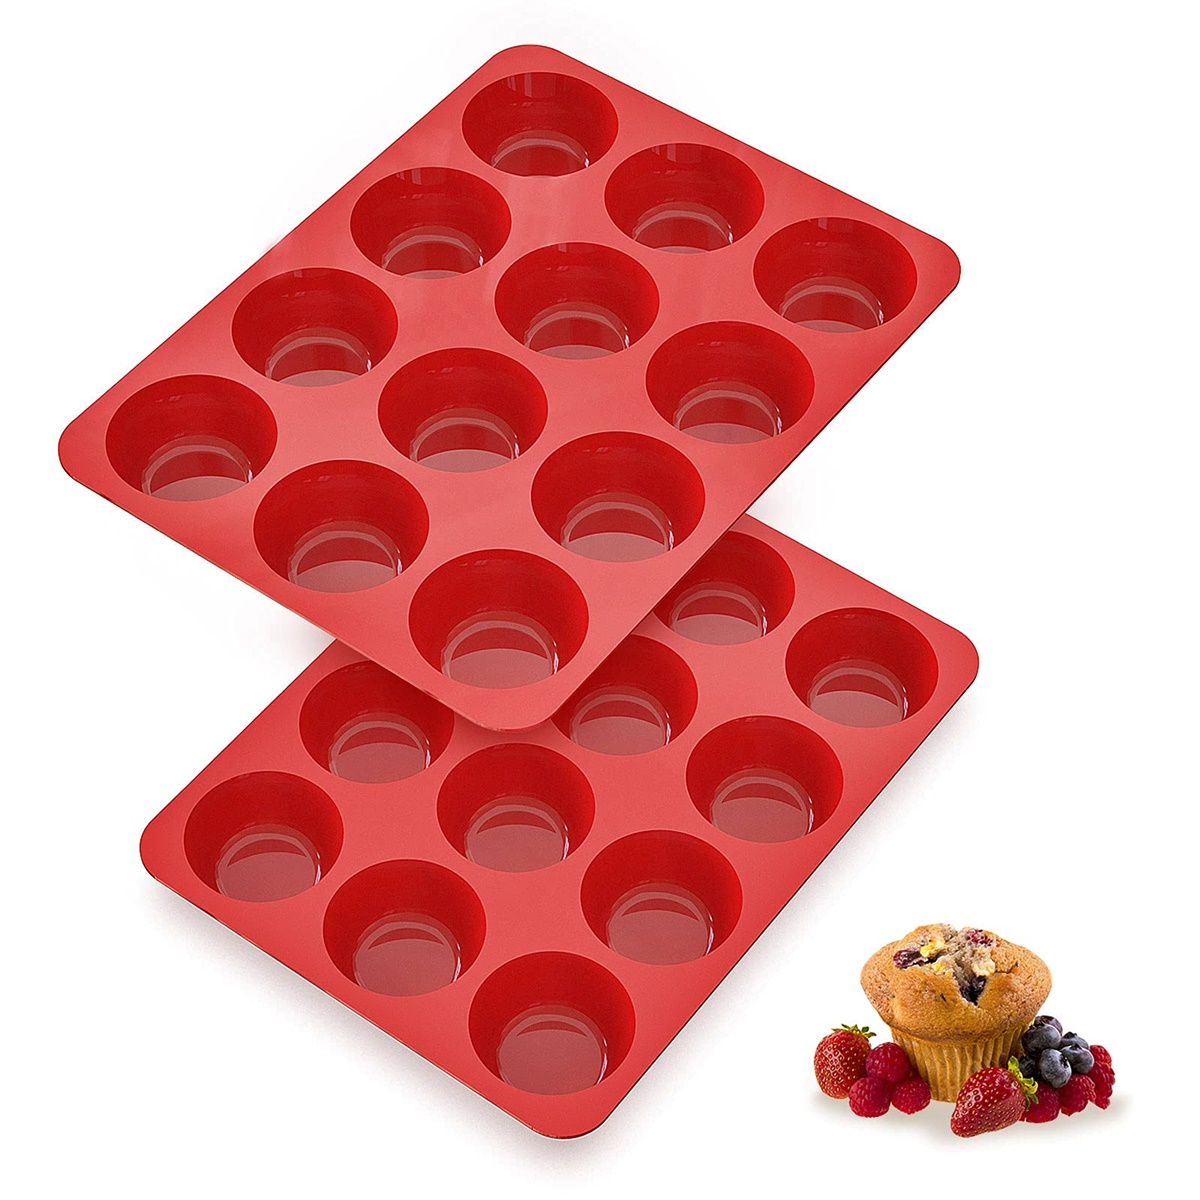 How To Use Silicone Muffin Tray